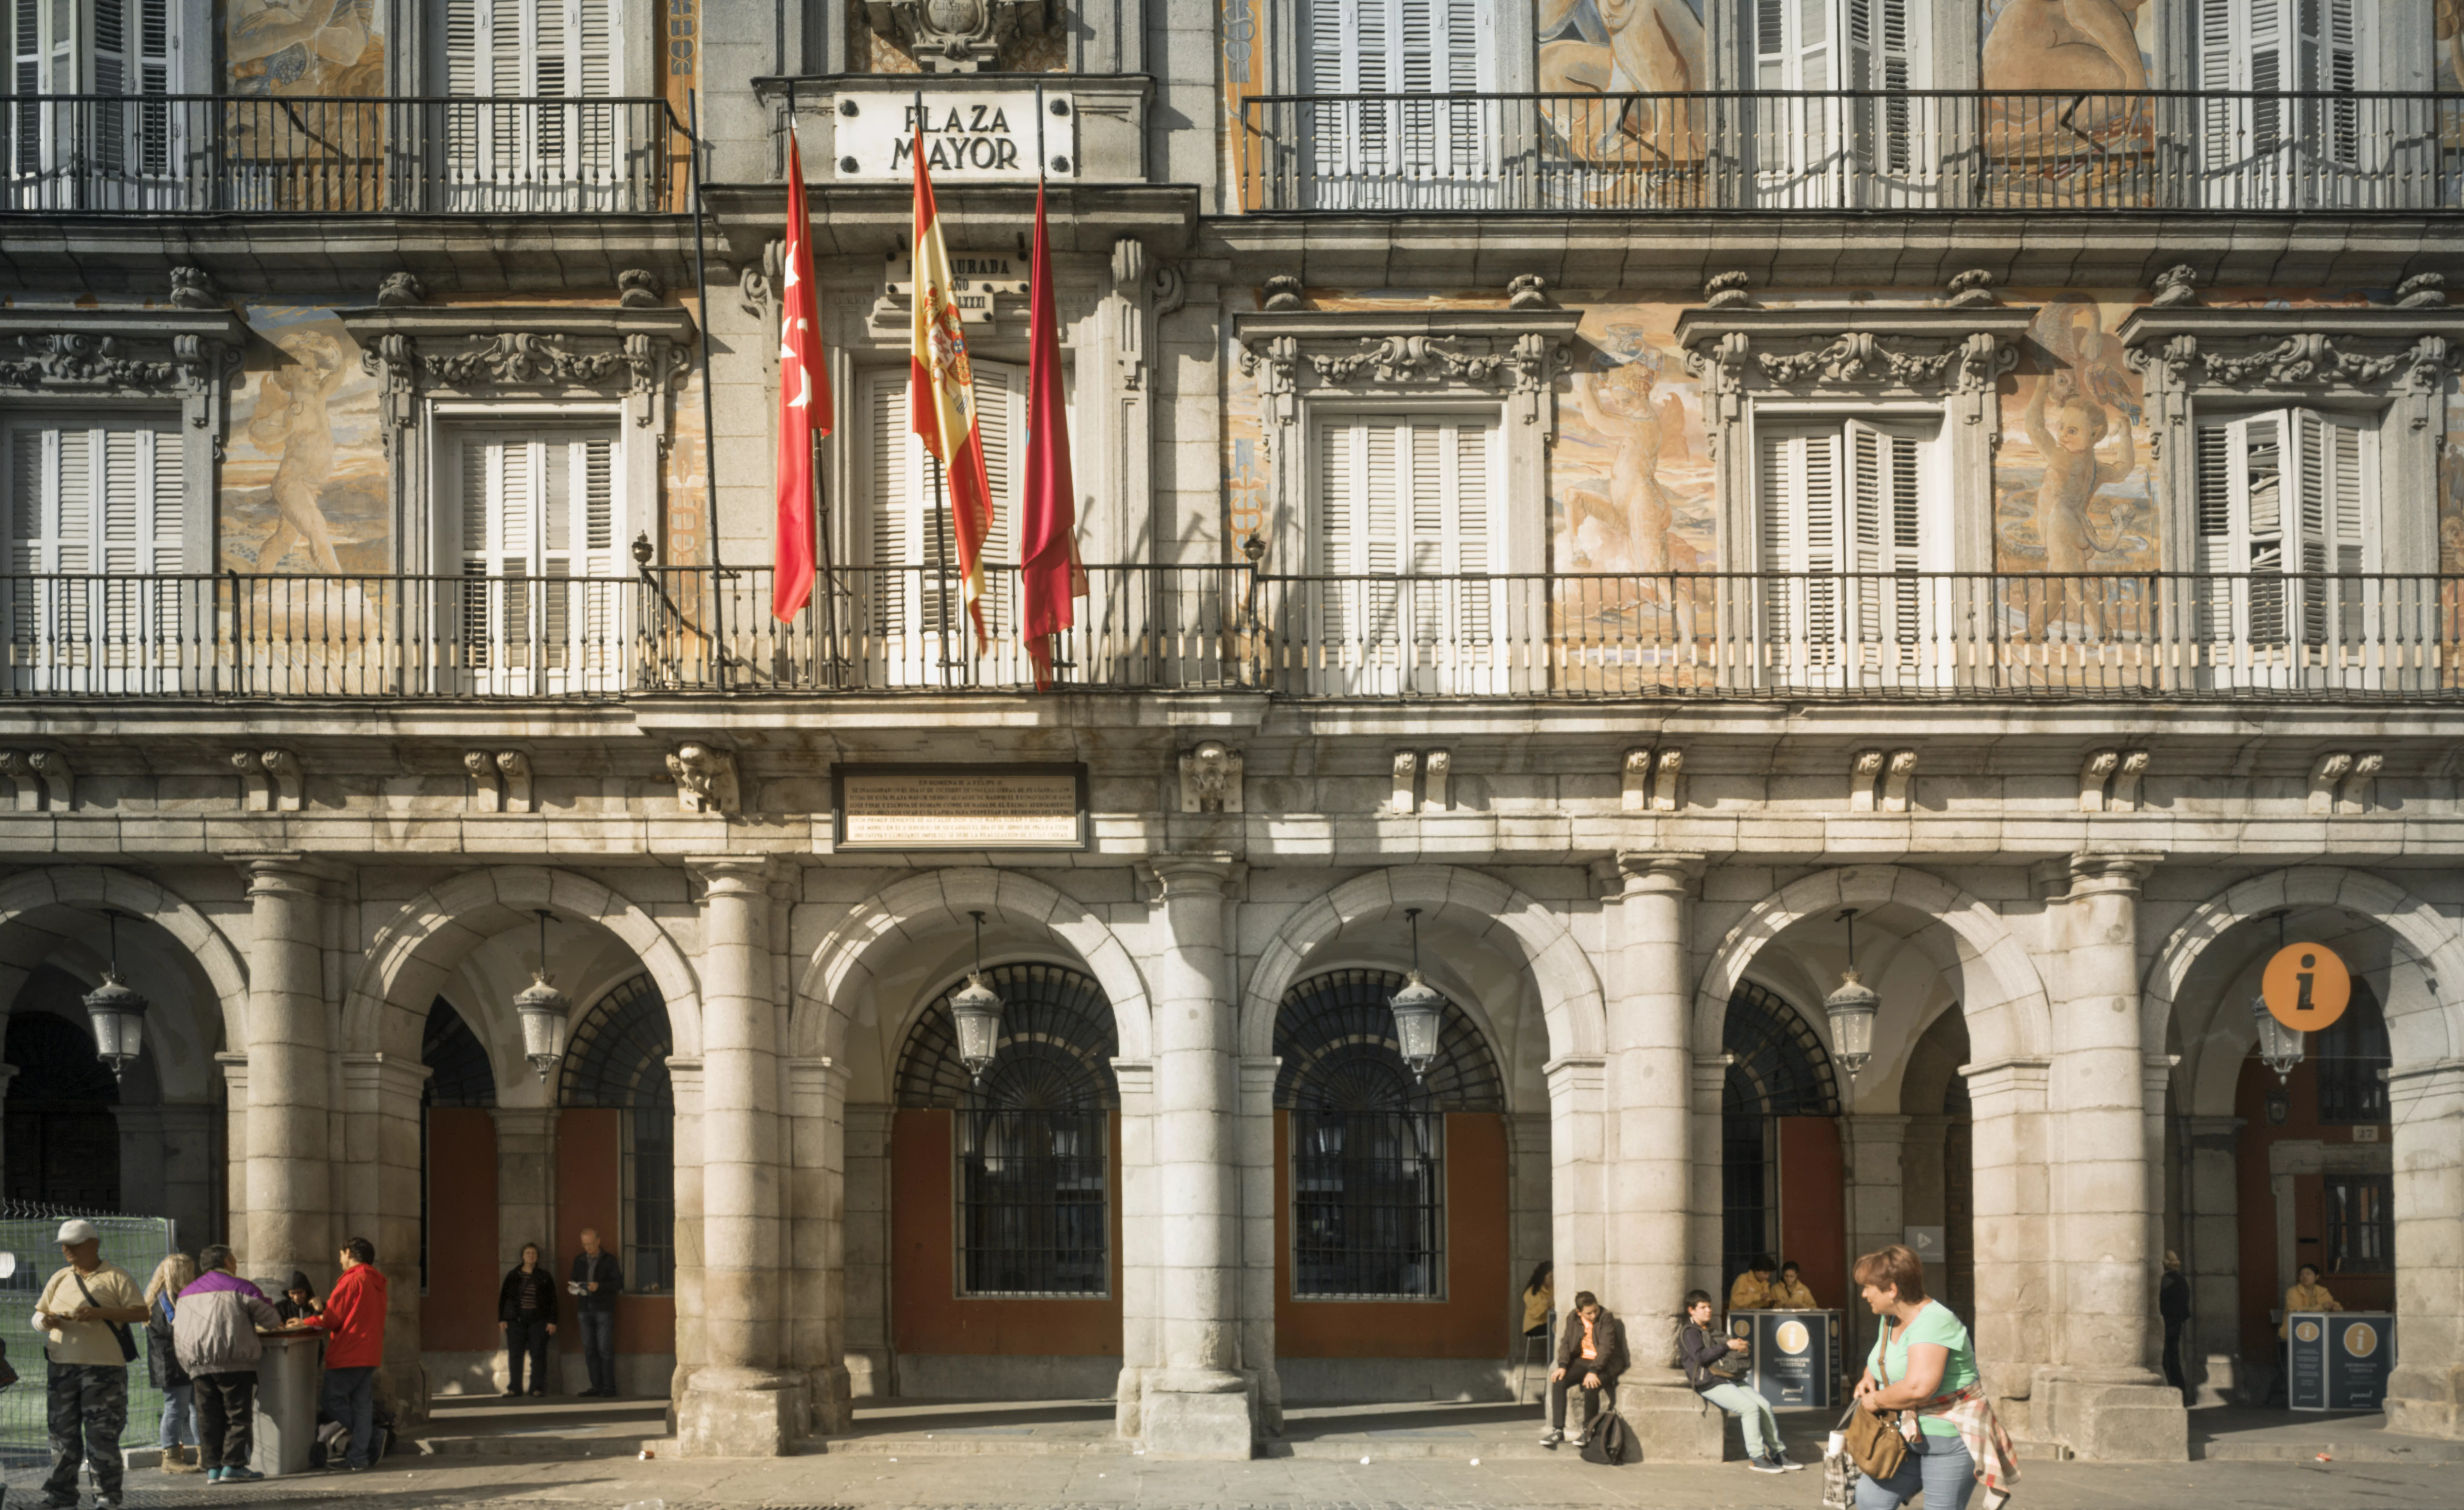 HIMACS: Redesign of the Tourist Office at Plaza Mayor in Madrid